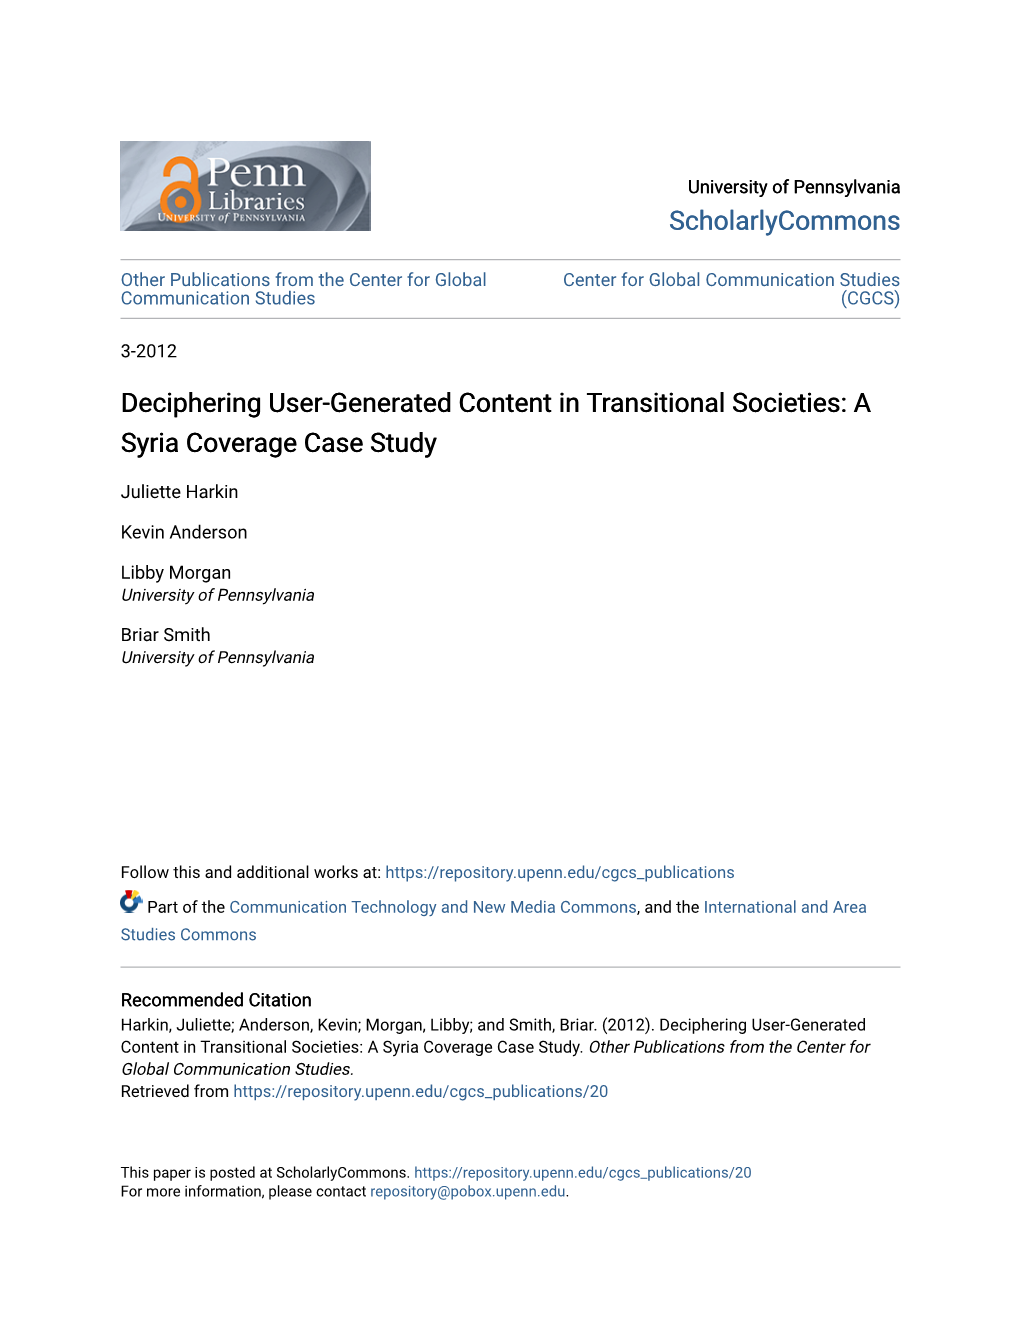 Deciphering User-Generated Content in Transitional Societies: a Syria Coverage Case Study